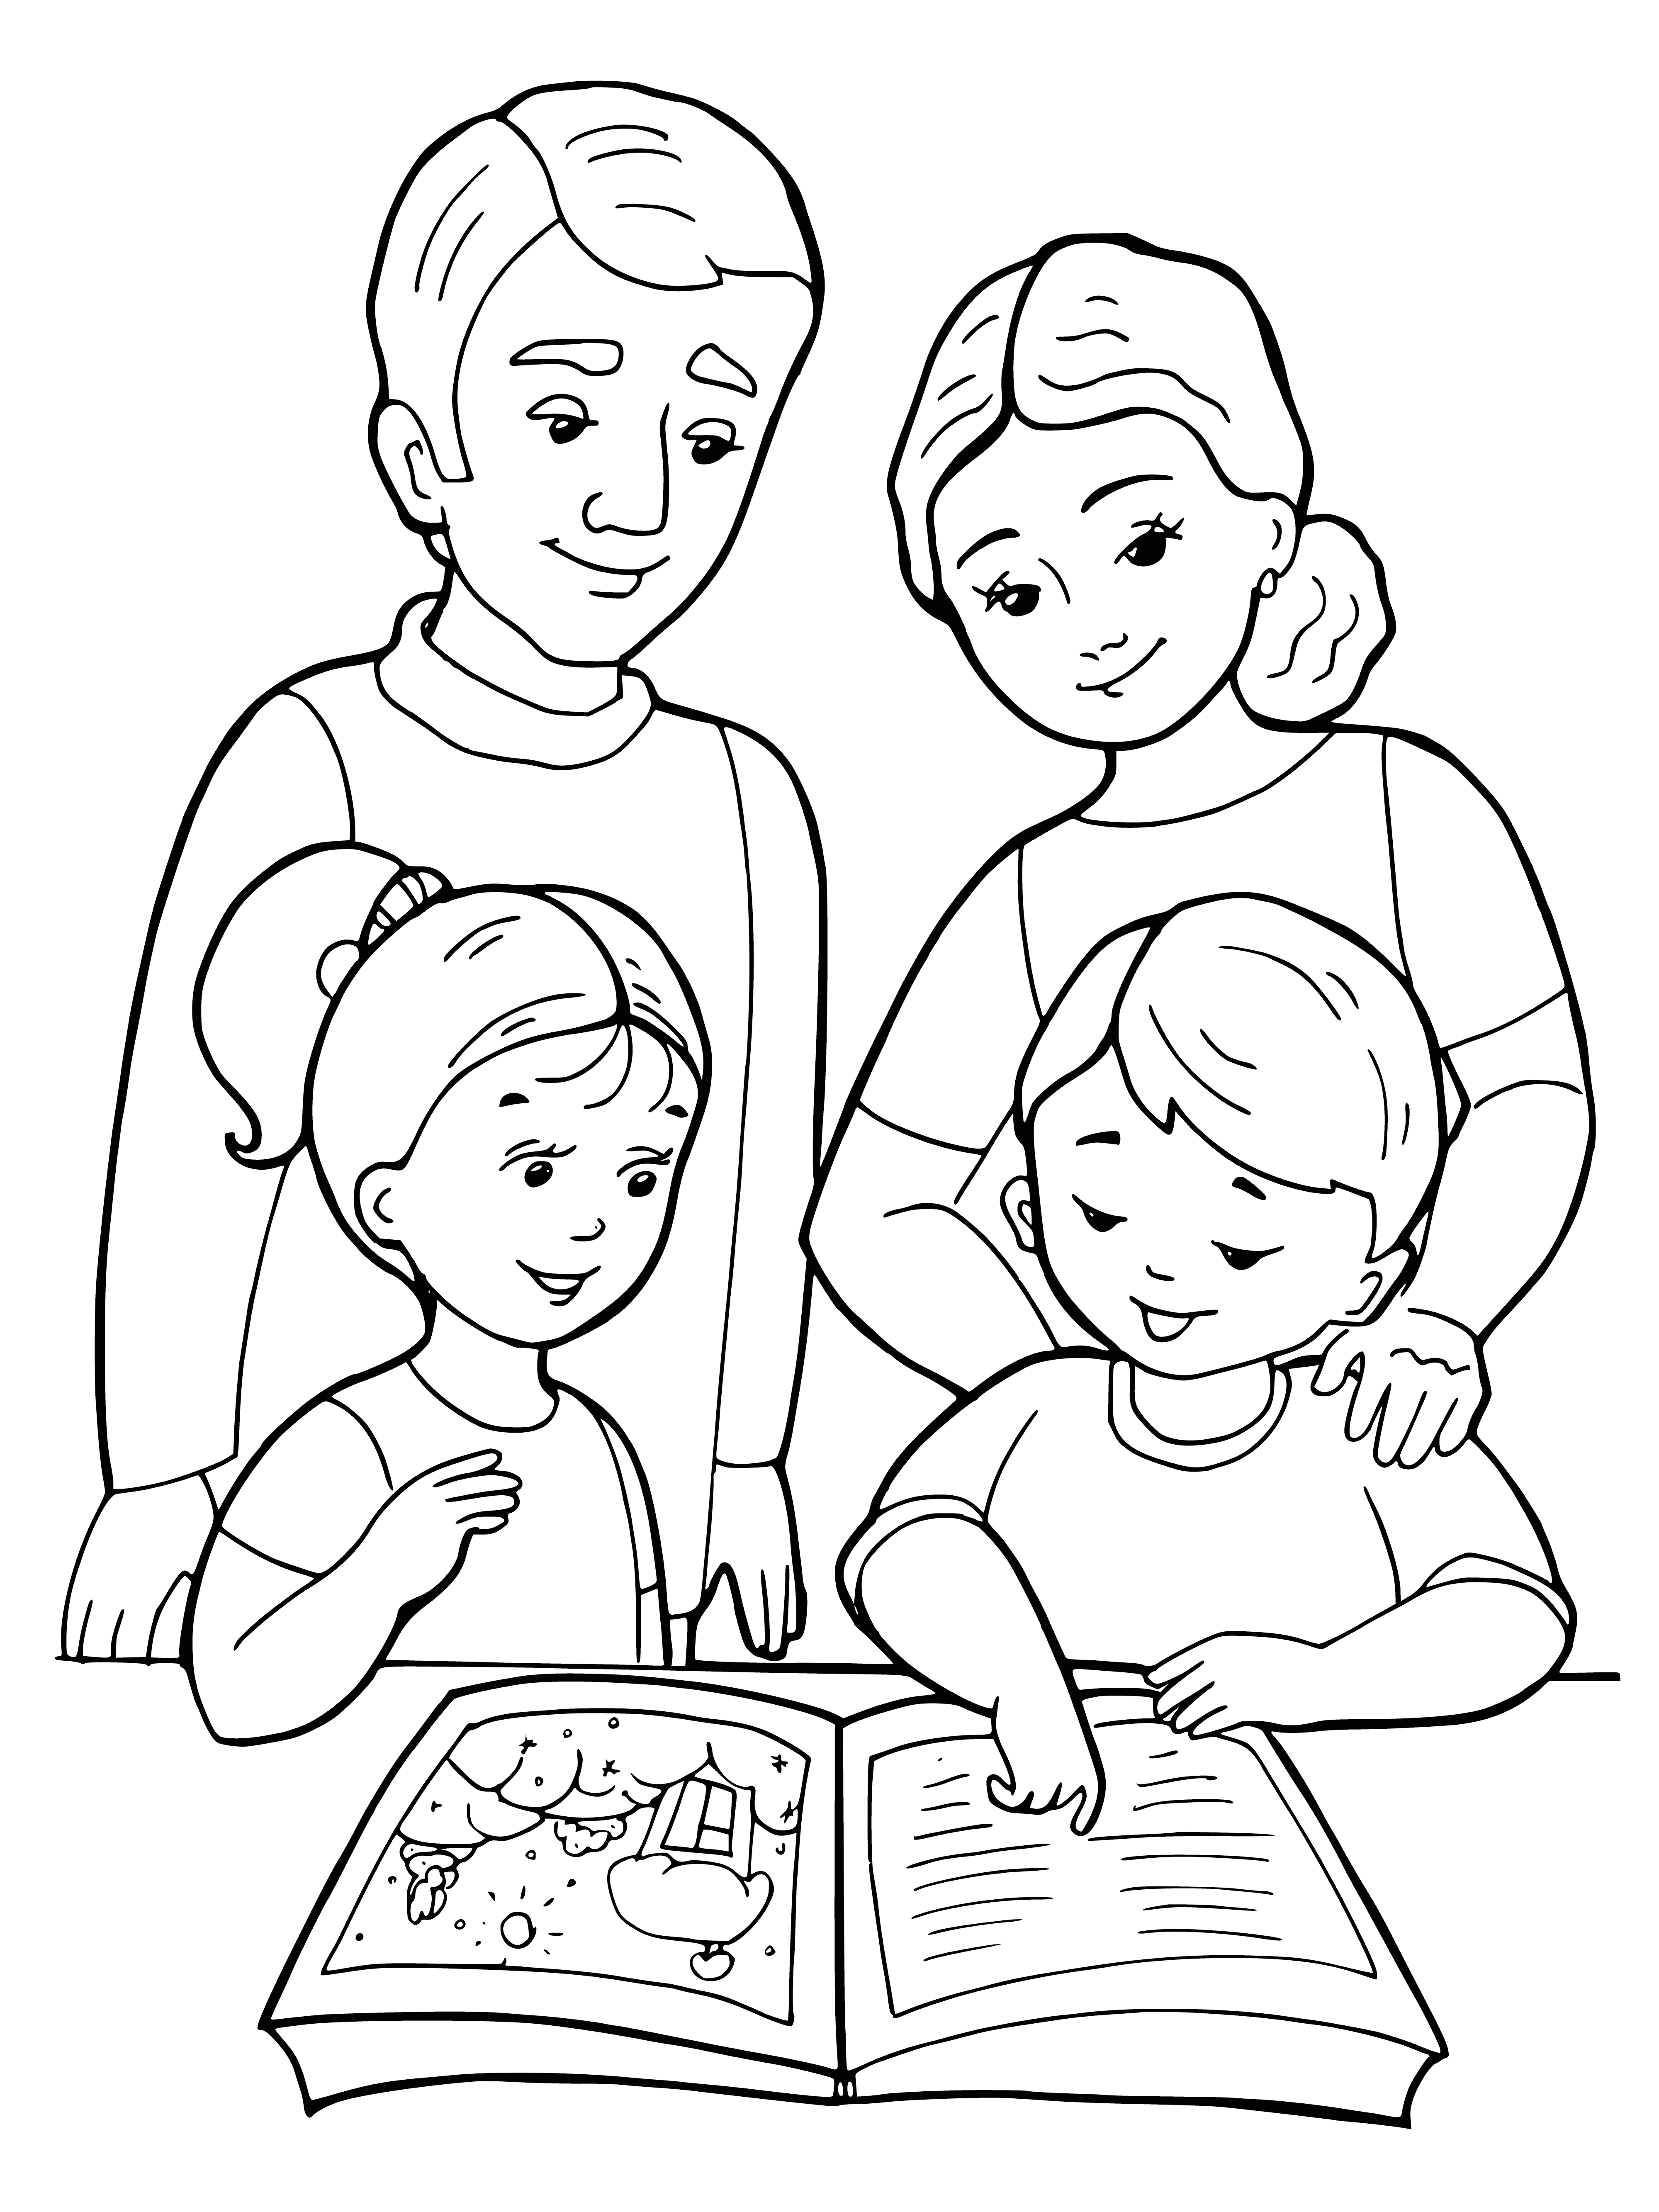 coloring page: Family enjoys sunny day outside: parents in chairs, kids play on blanket with doll & truck, dog by boy.